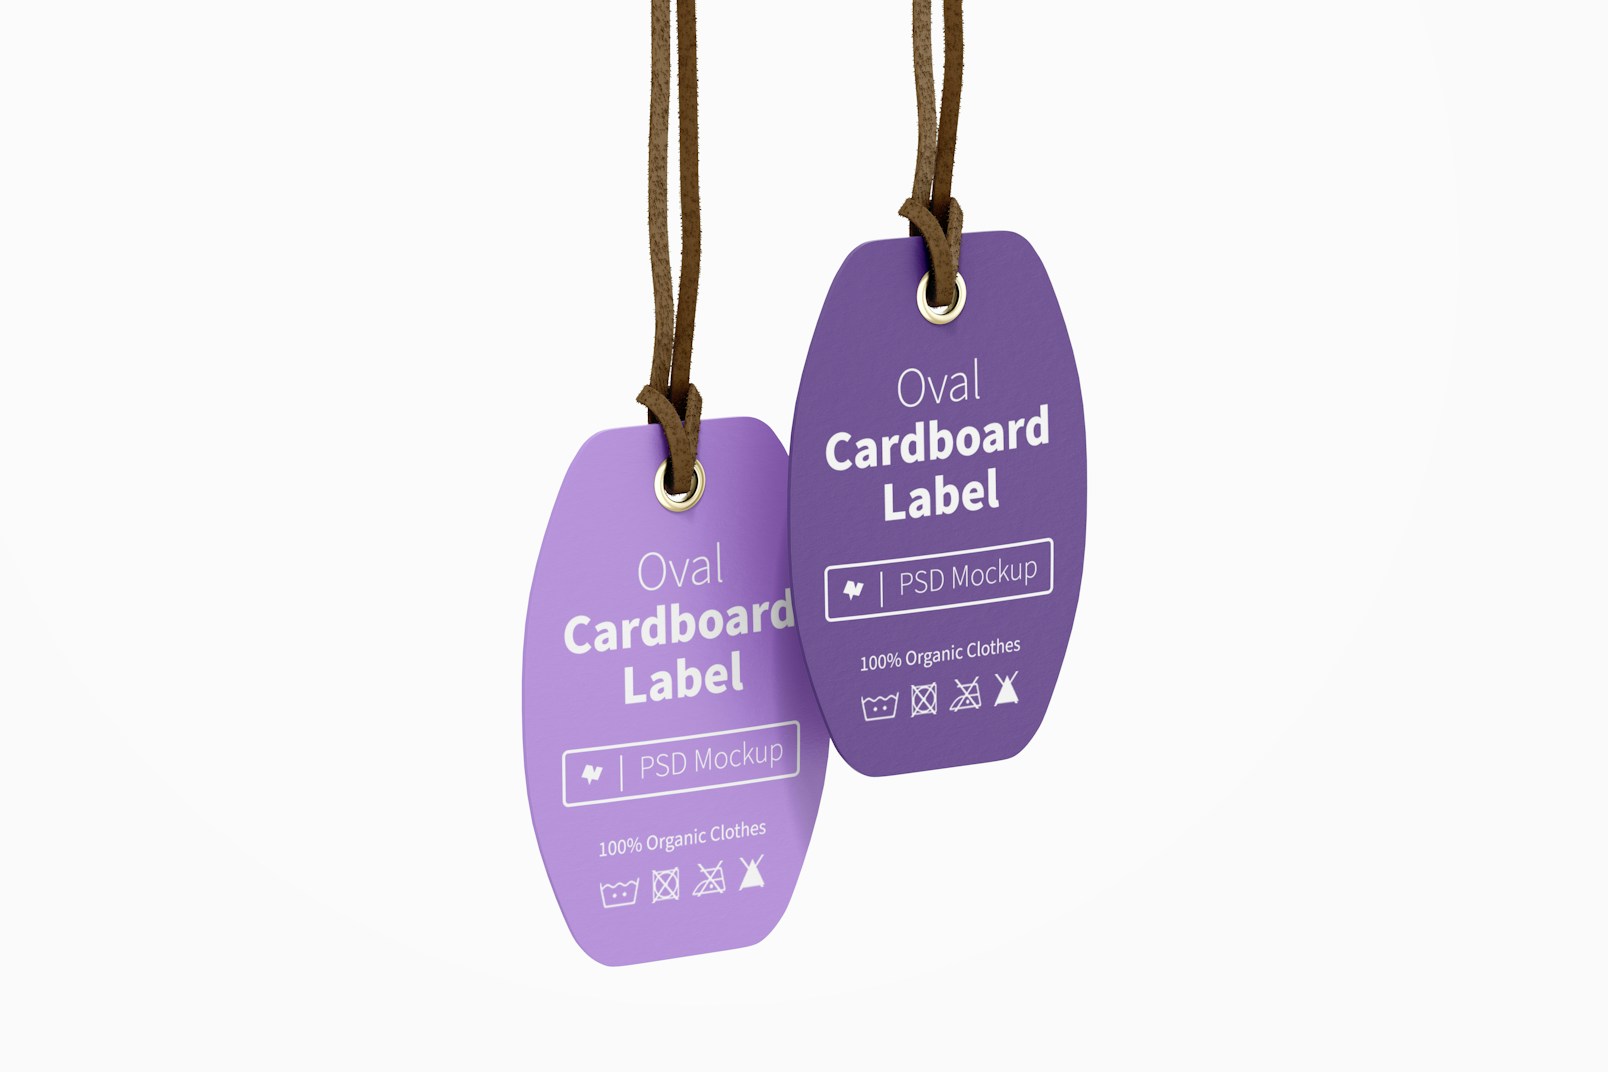 Oval Cardboard Labels with Leather Rope Mockup, Hanging